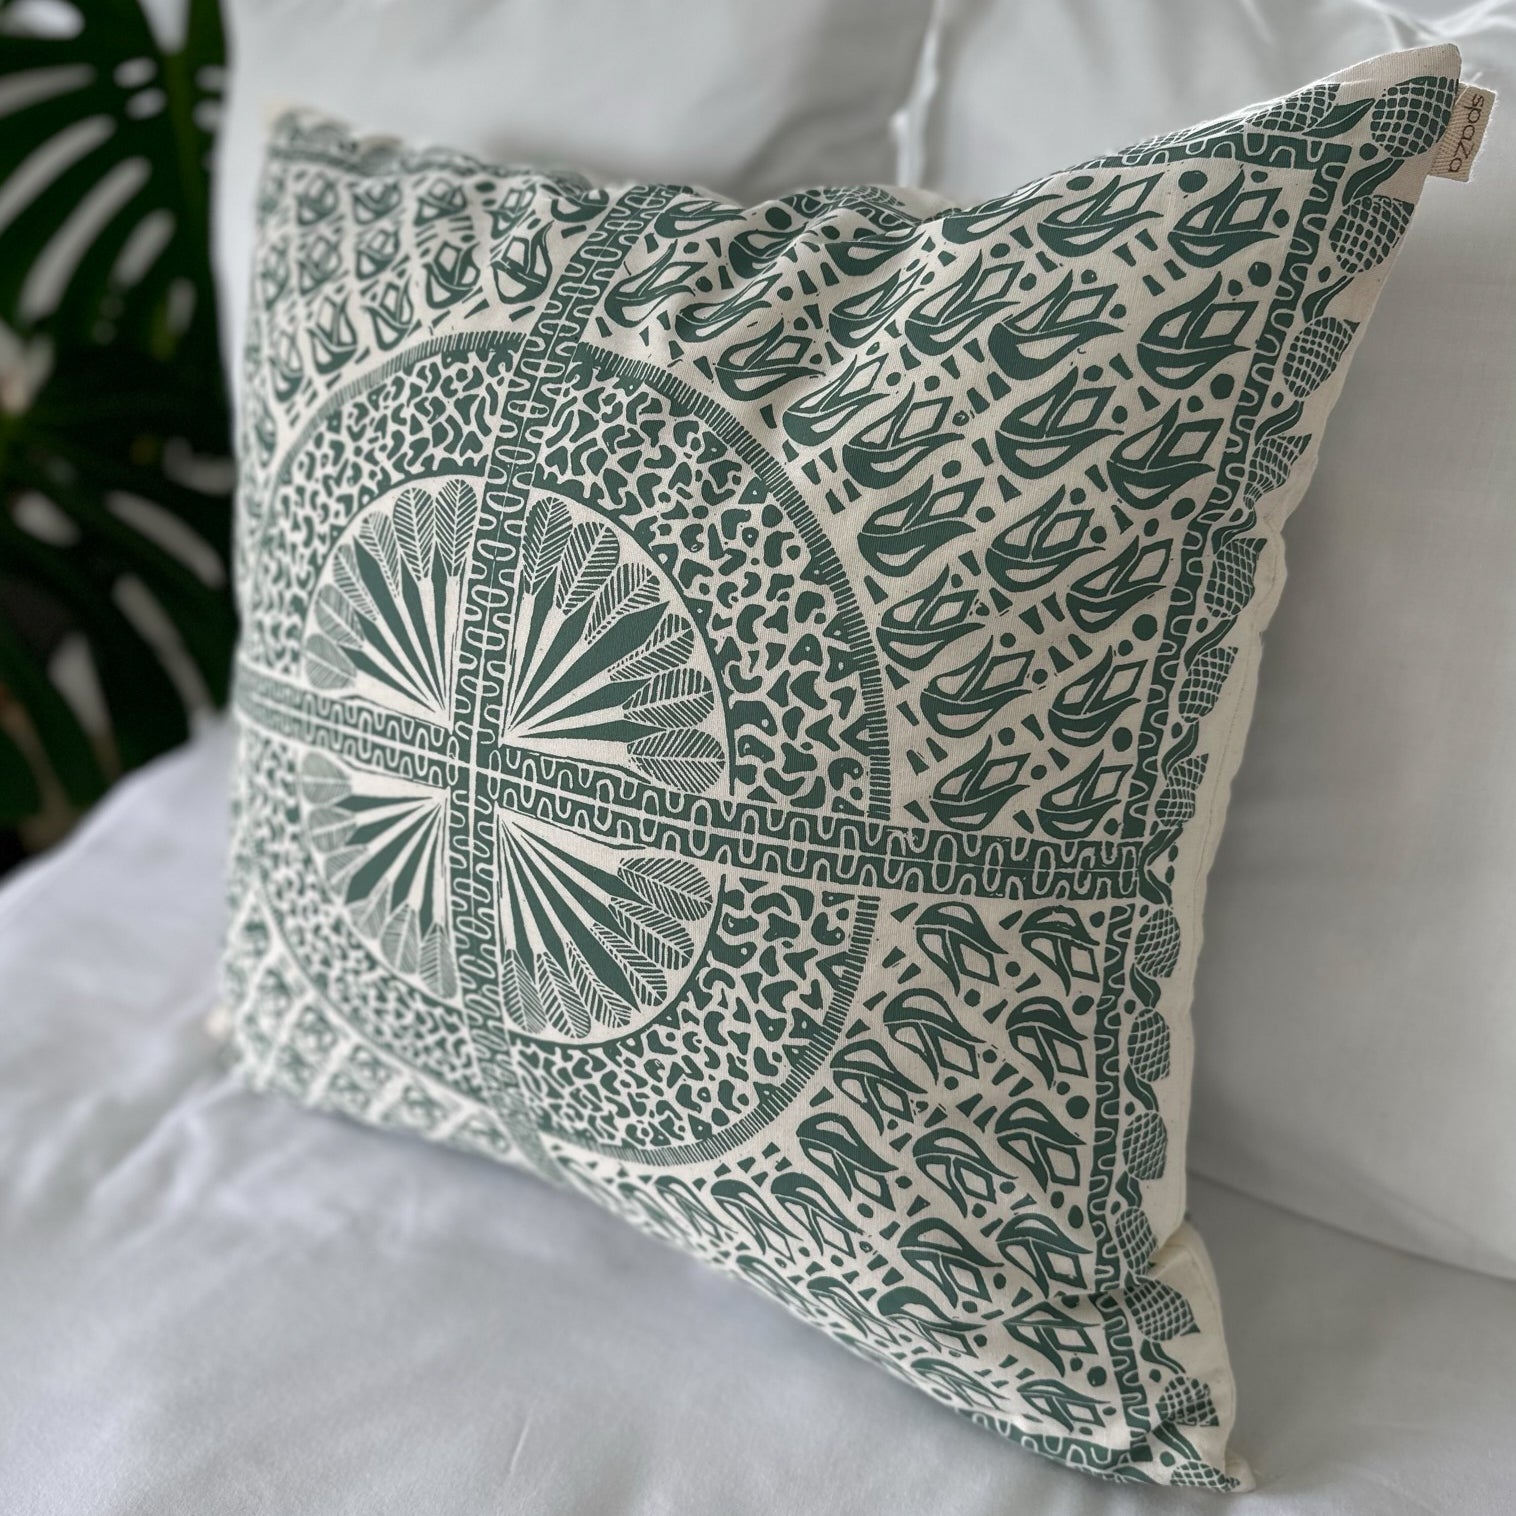 Cushion Cover 24" 60cm square continental organic cotton gold, teal, grey